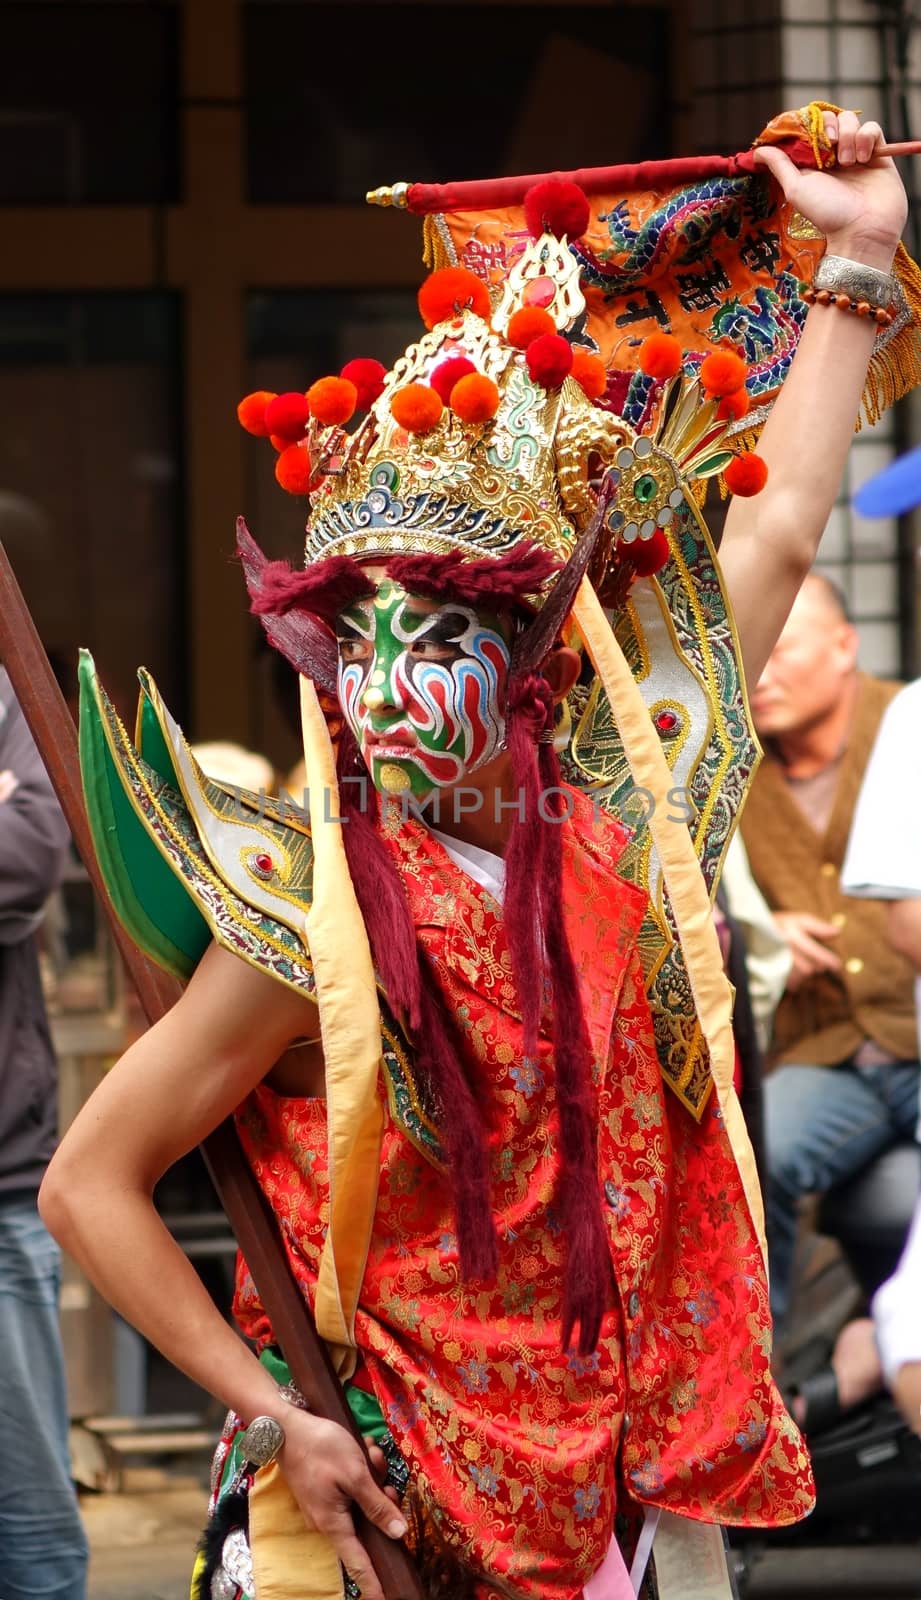 KAOHSIUNG, TAIWAN -- MARCH 16, 2014: A young man with painted facial mask and dressed up as an ancient warrior dances at a local temple ceremony.